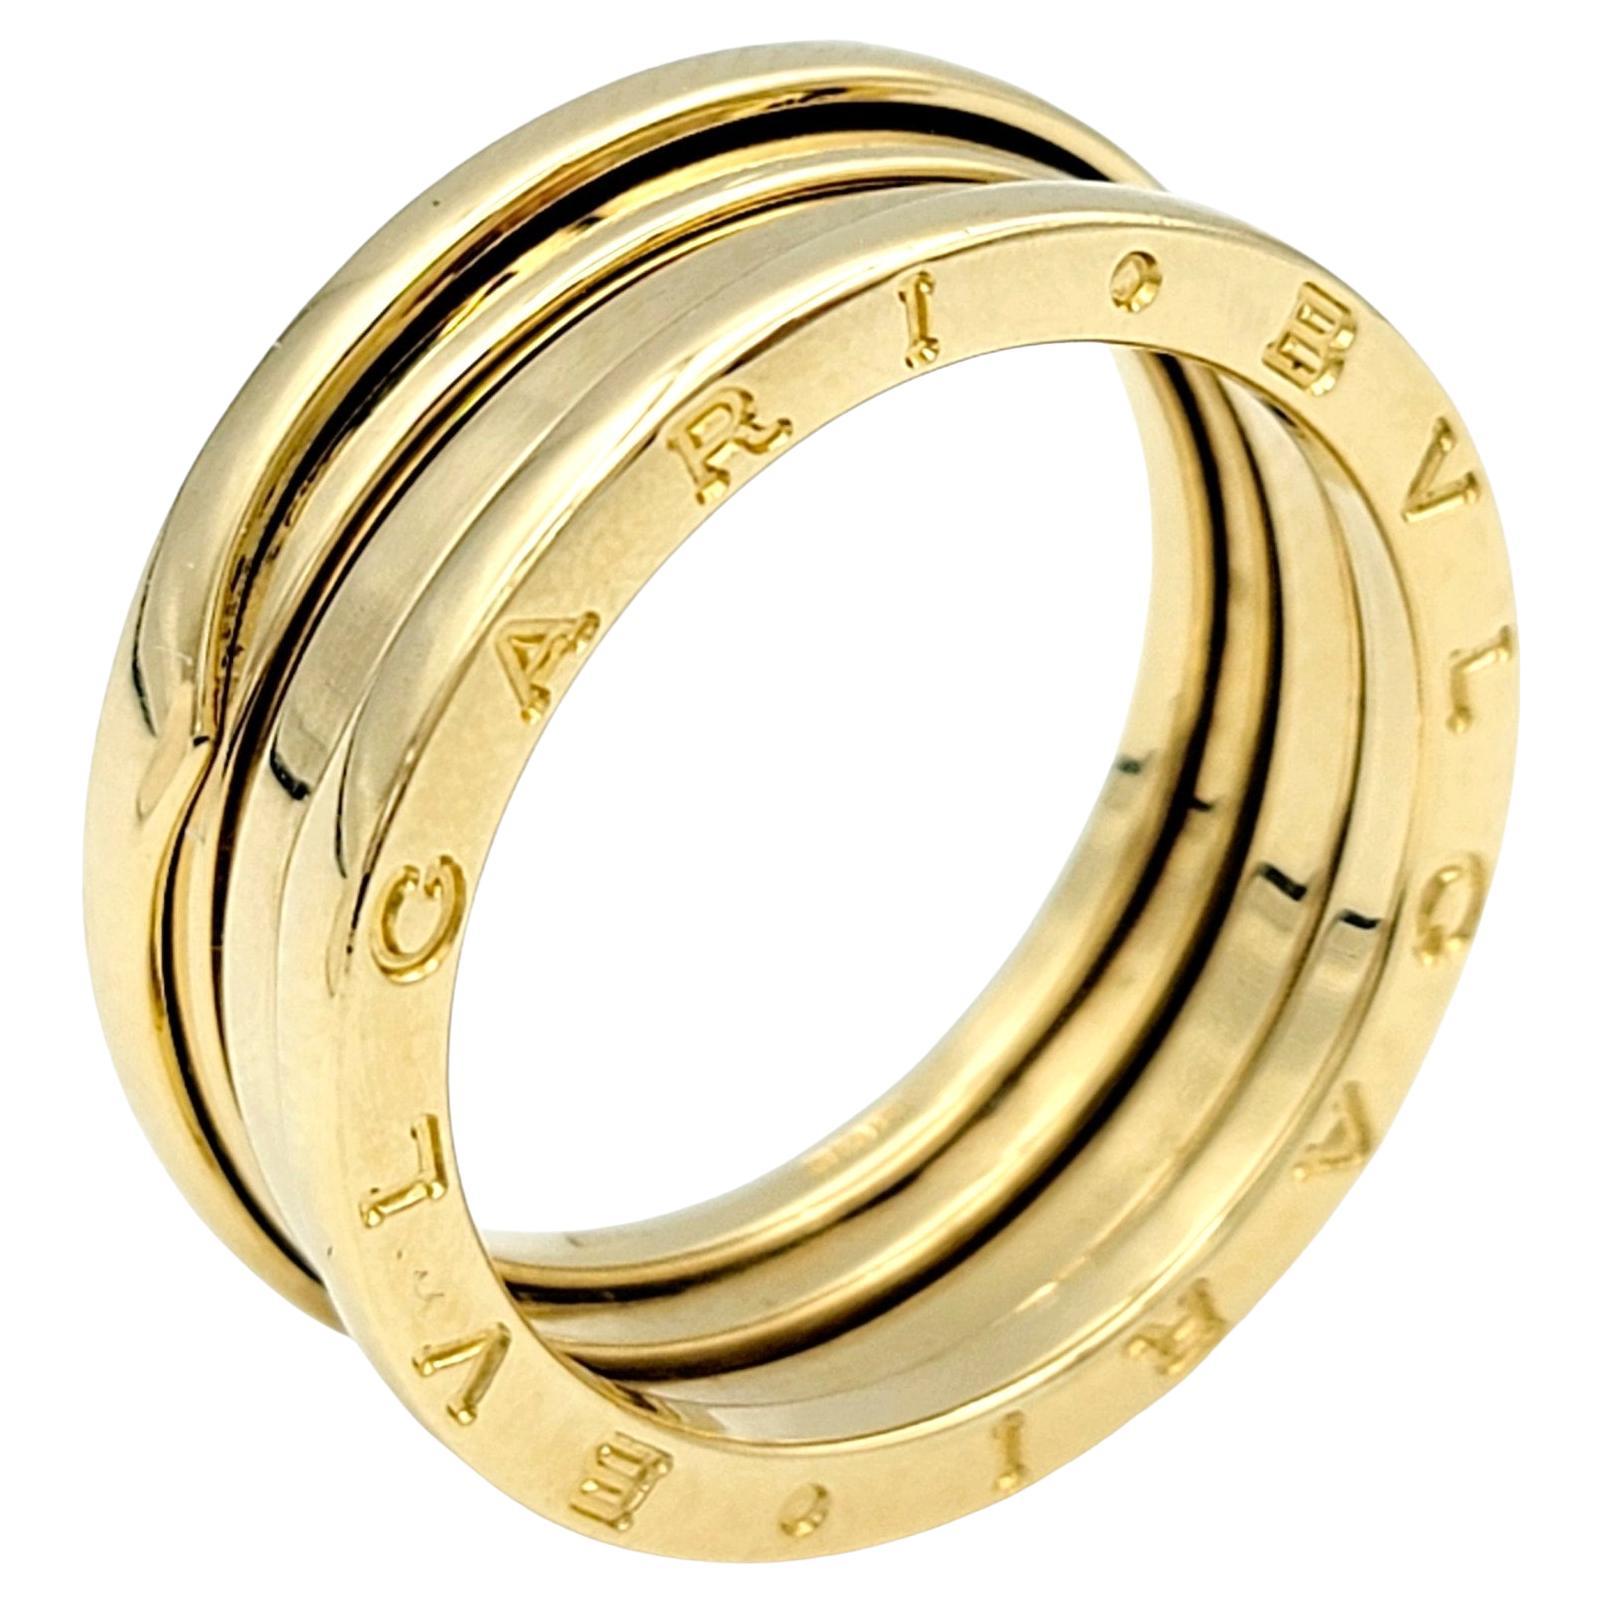 Ring Size 10.25

This luxurious and modern Bulgari B.ZERO1 yellow gold ring is a work of art. This exquisite piece draws inspiration from the iconic Colosseum, representing Bulgari's unparalleled creativity in jewelry design. The ring's unique